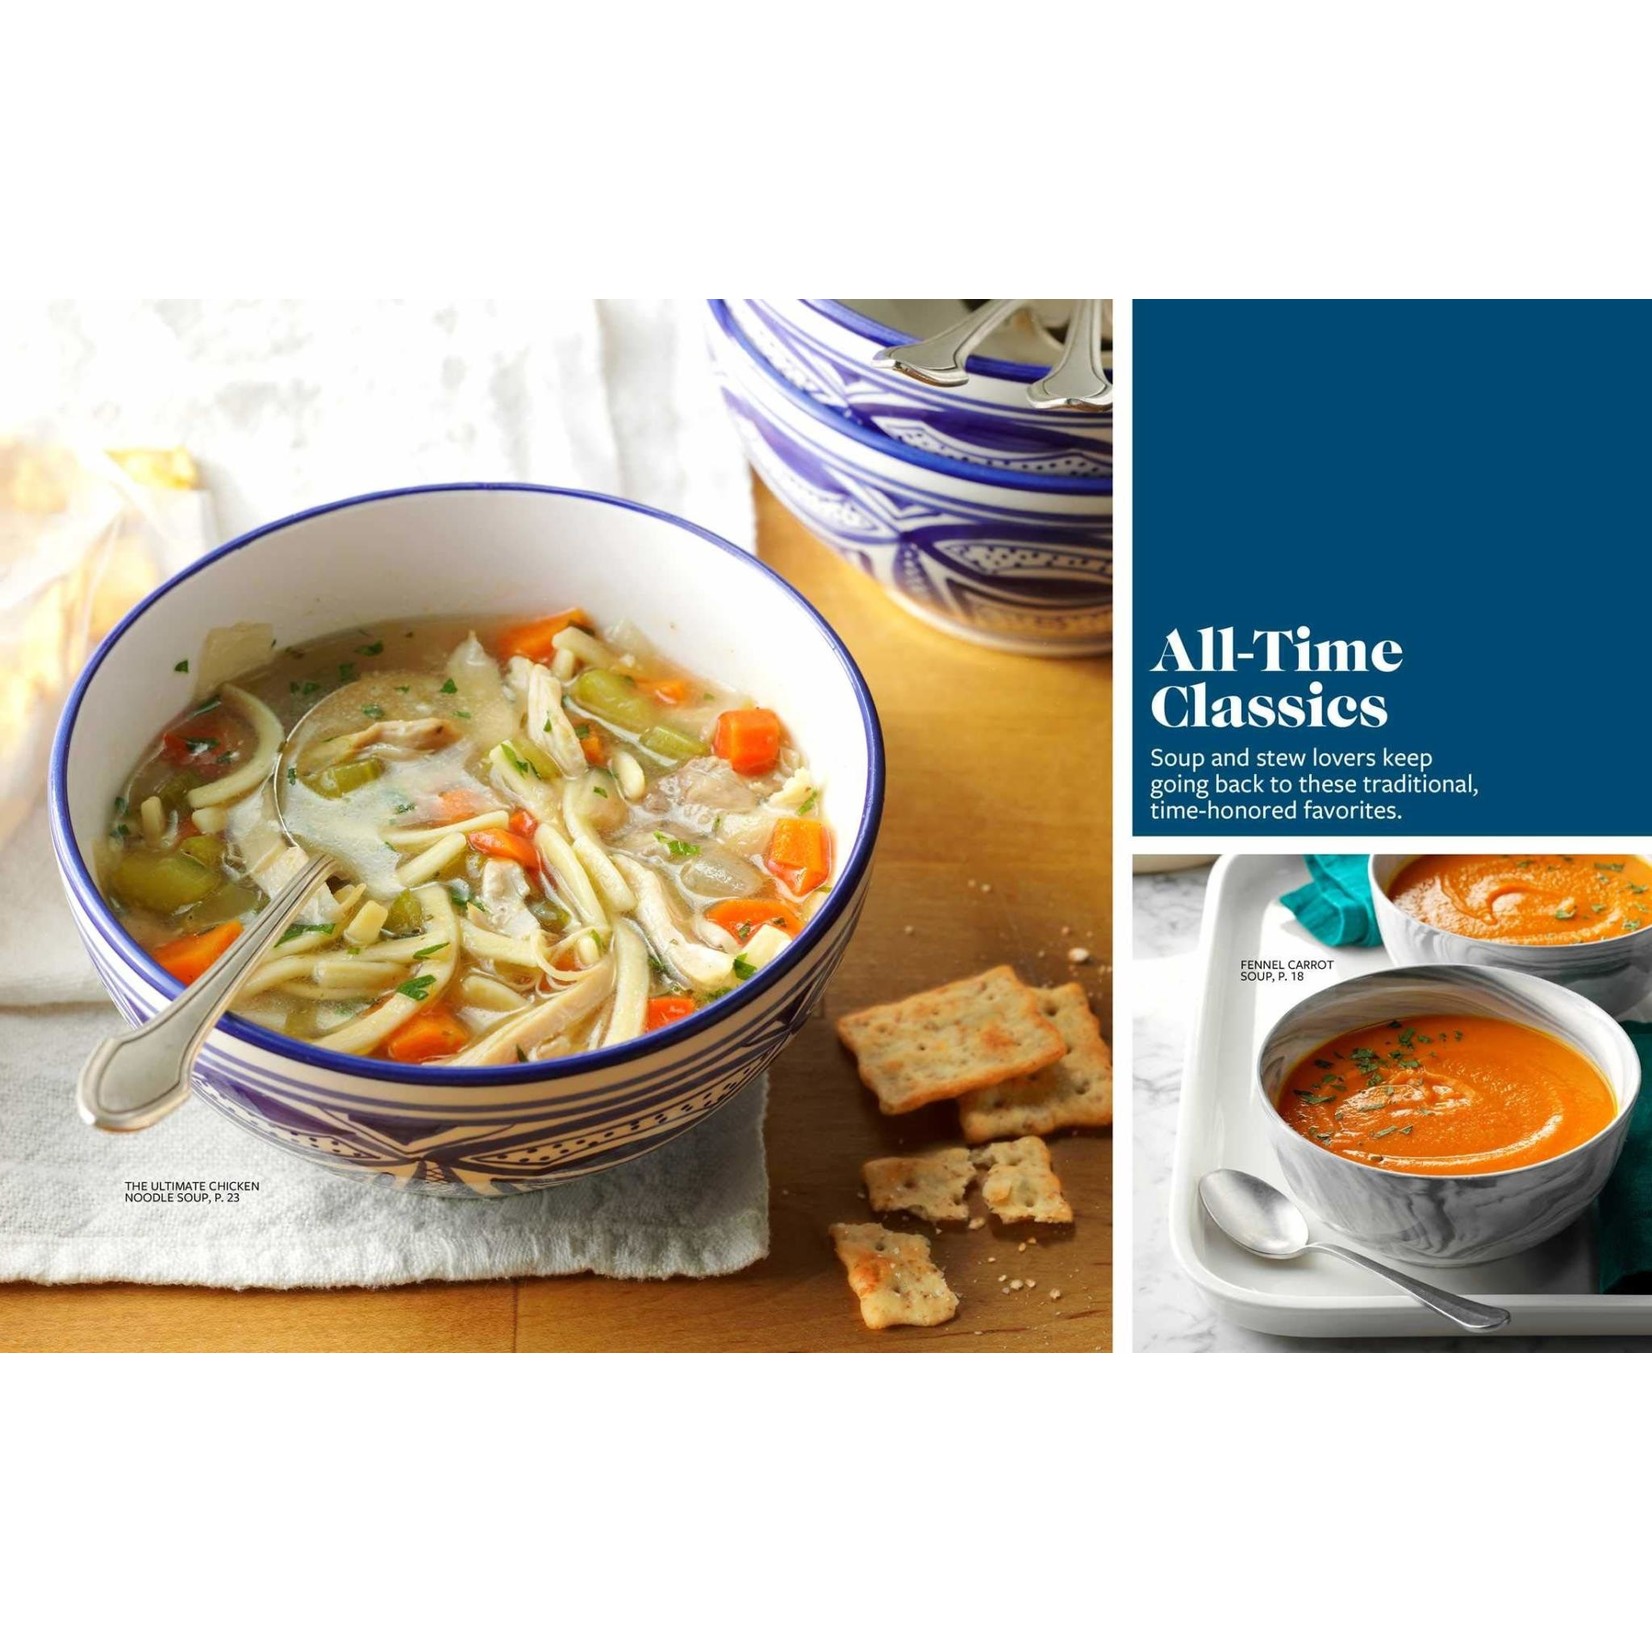 Taste of Home Soups, Stews and More